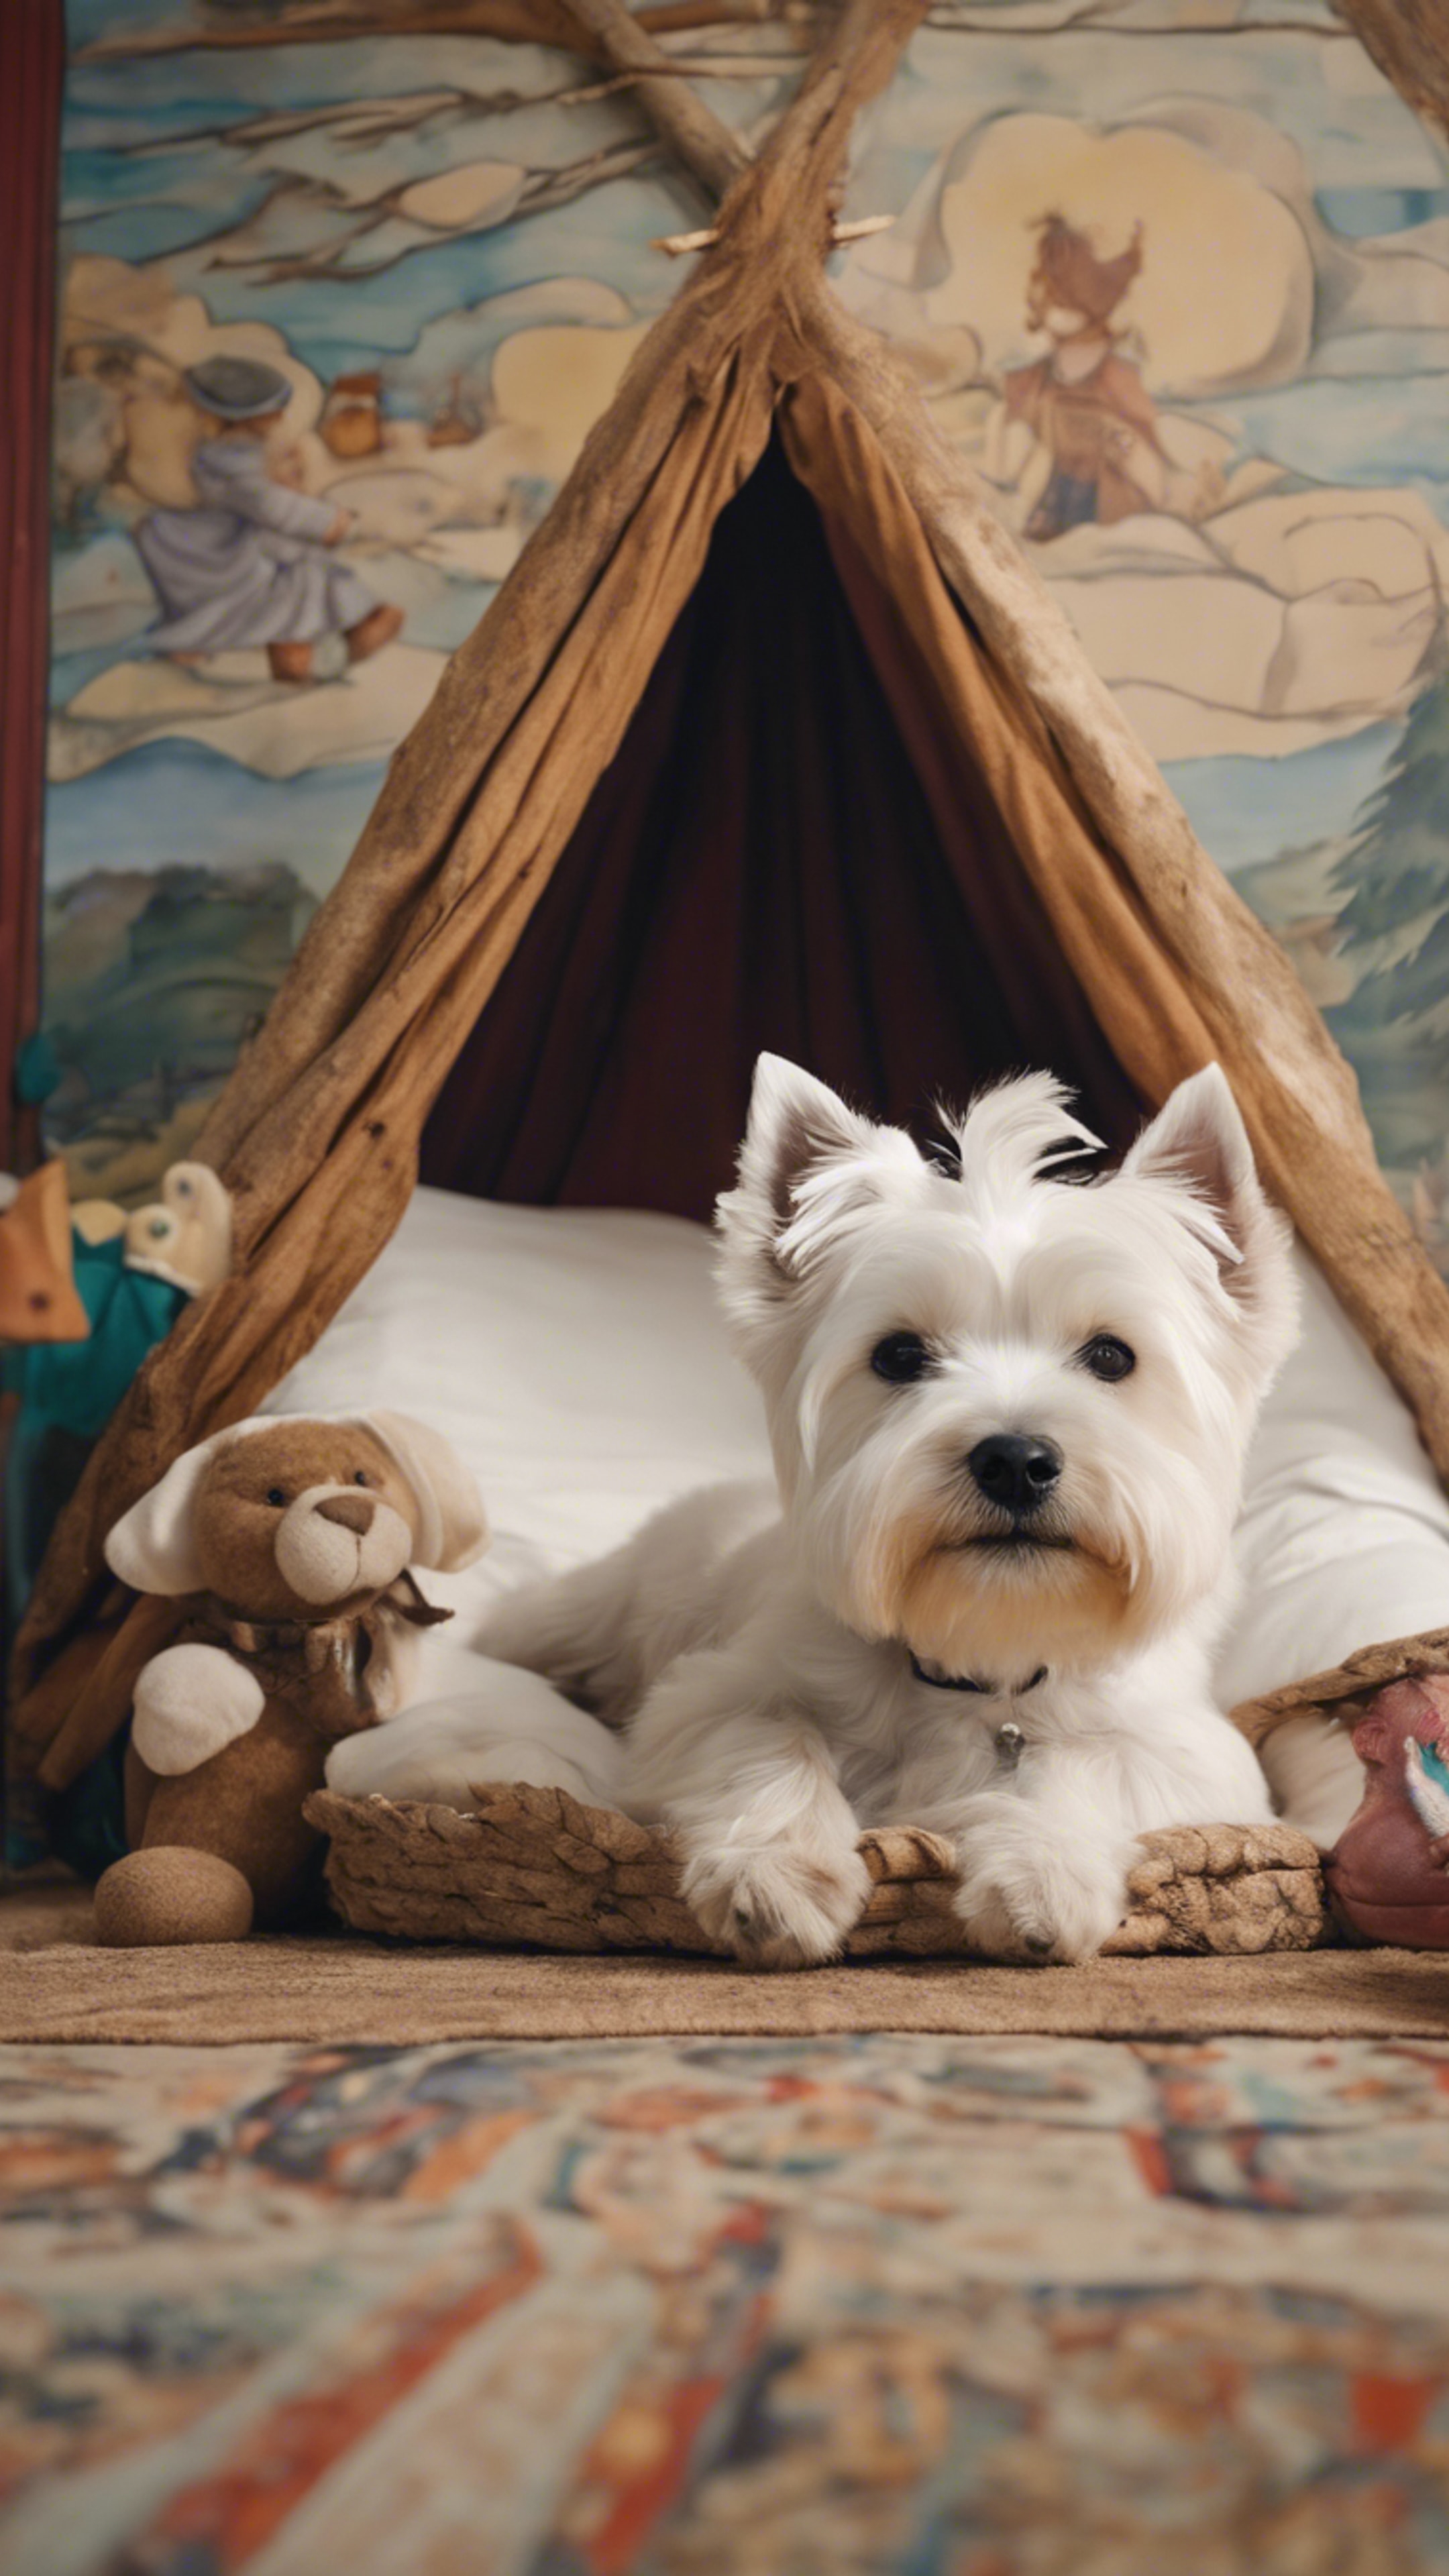 A West Highland White Terrier napping in a baby's room, underneath a hand-painted mural of a folk tale scene. Wallpaper[bb3e34781cf244348015]